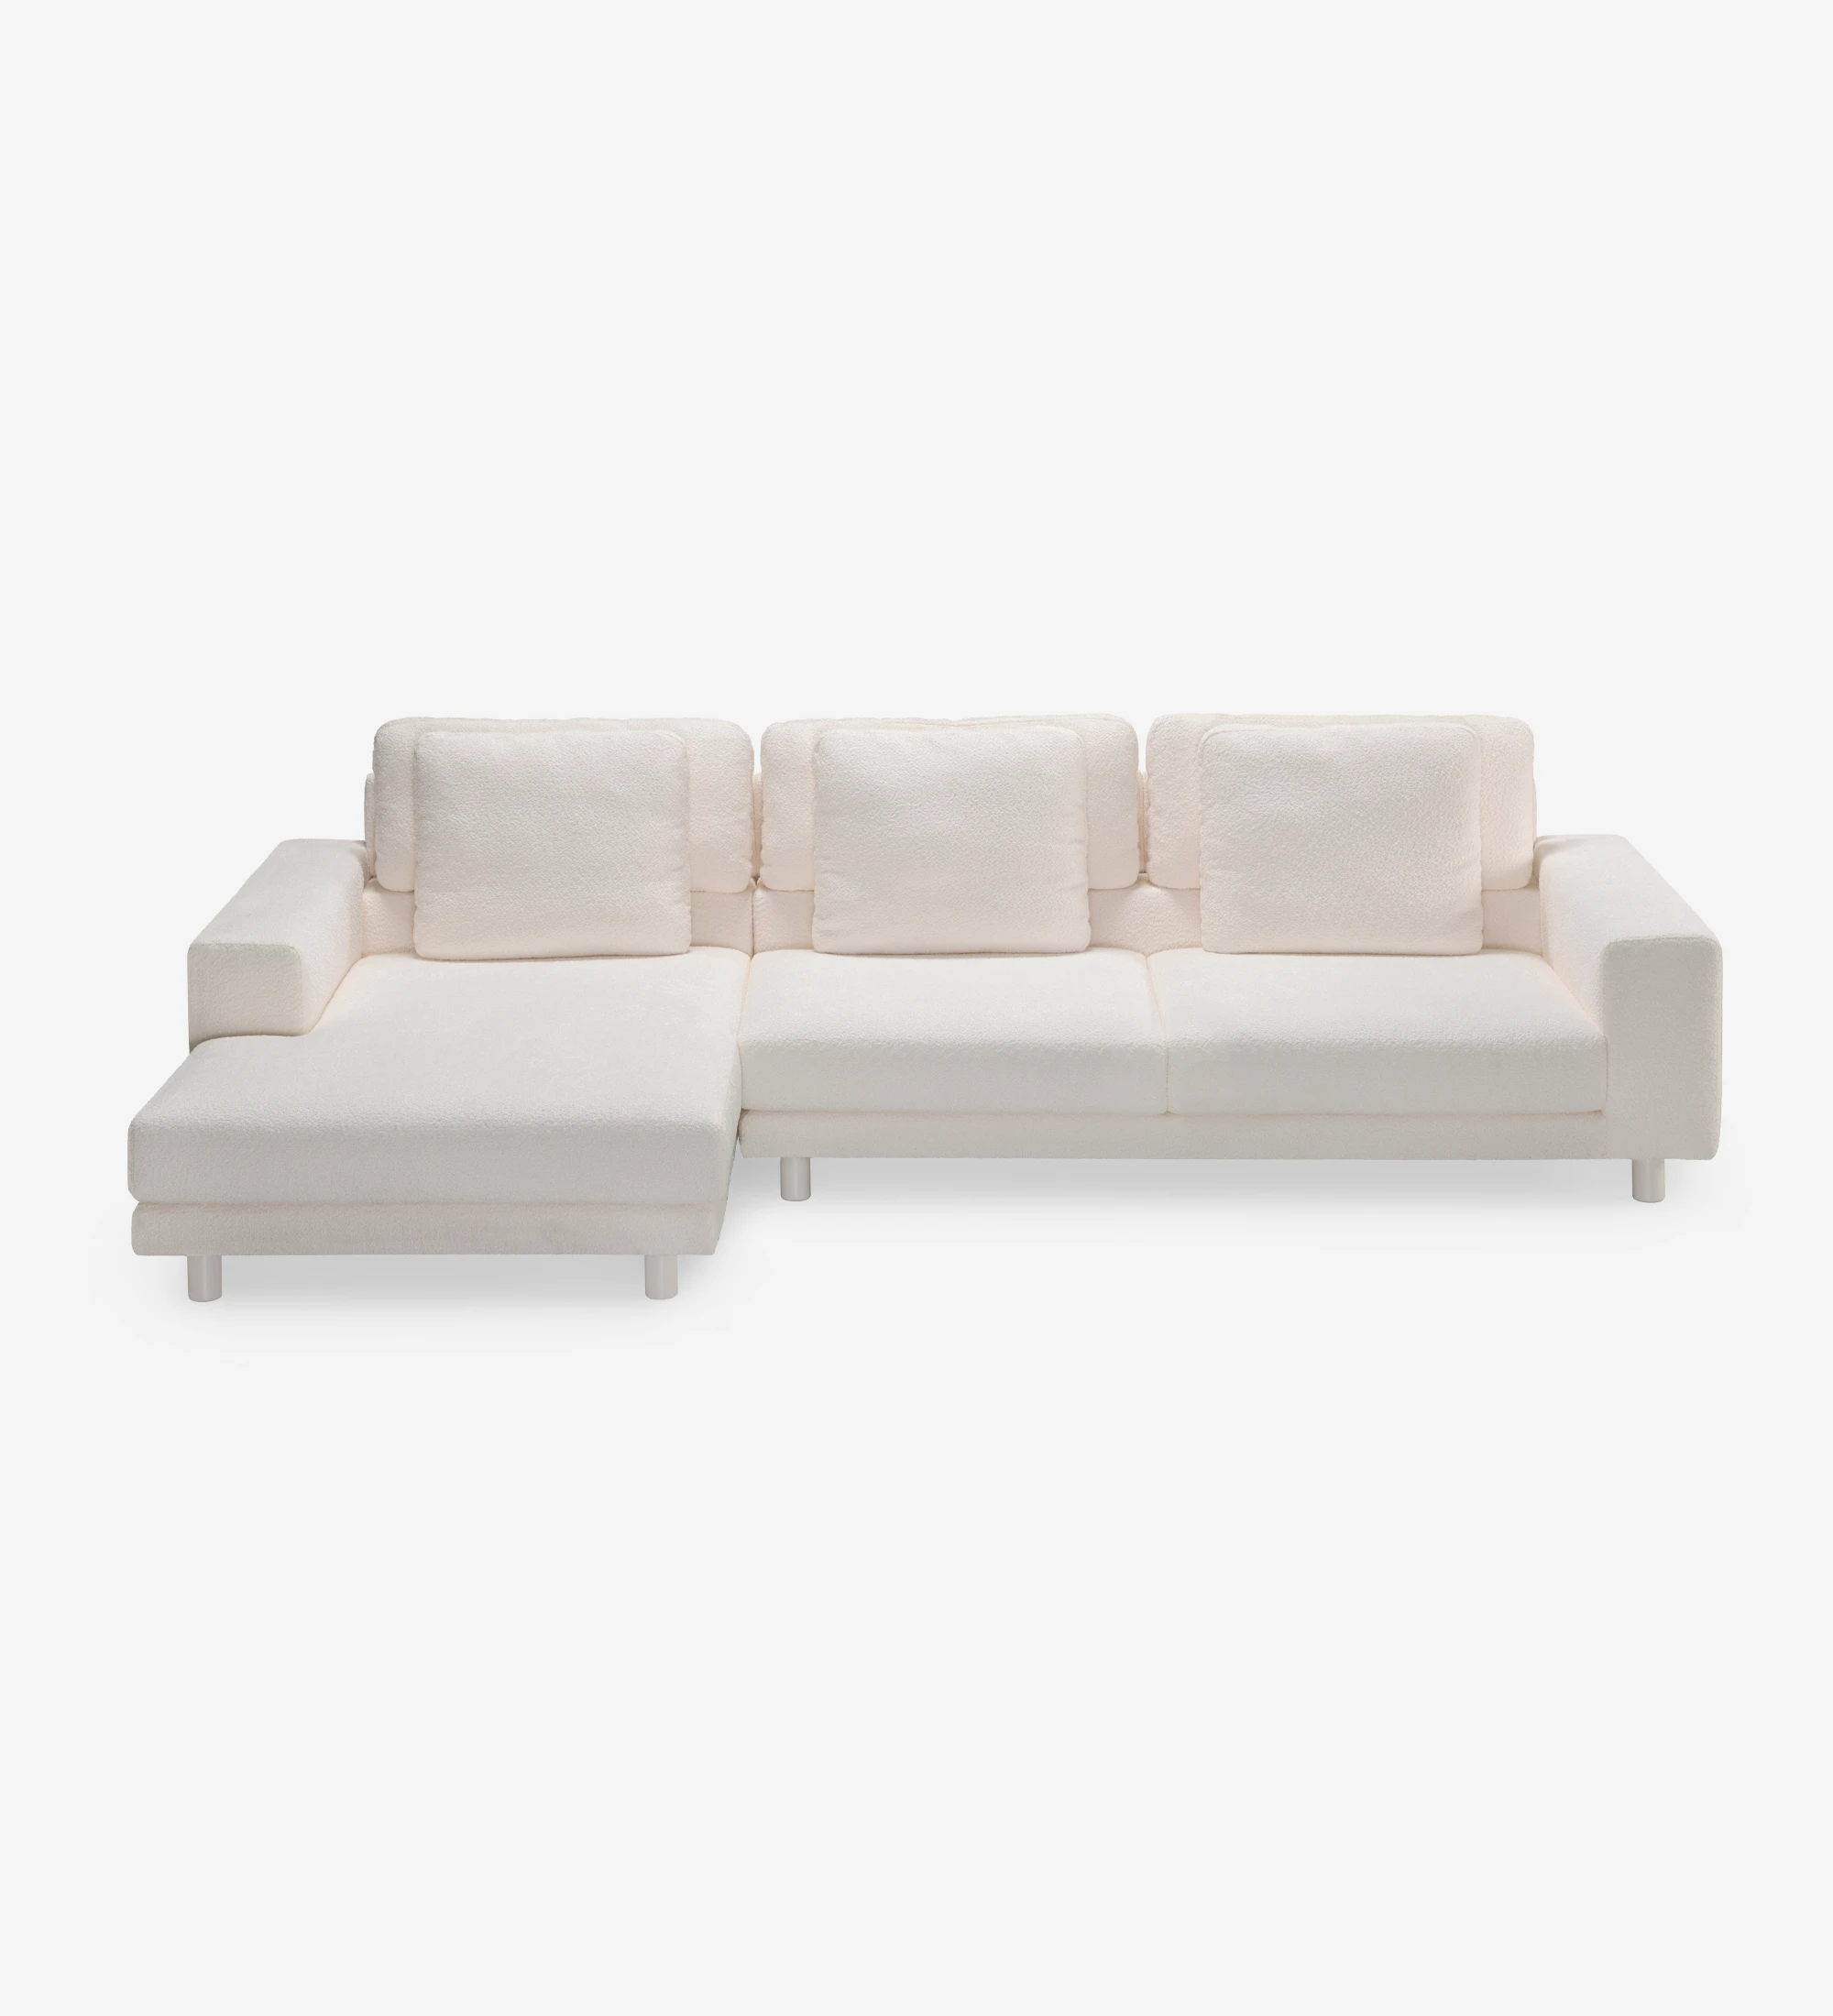 Dallas 3-seater sofa and left chaise longue, upholstered in beige fabric, folding back cushions, pearl lacquered feet, 318 cm.